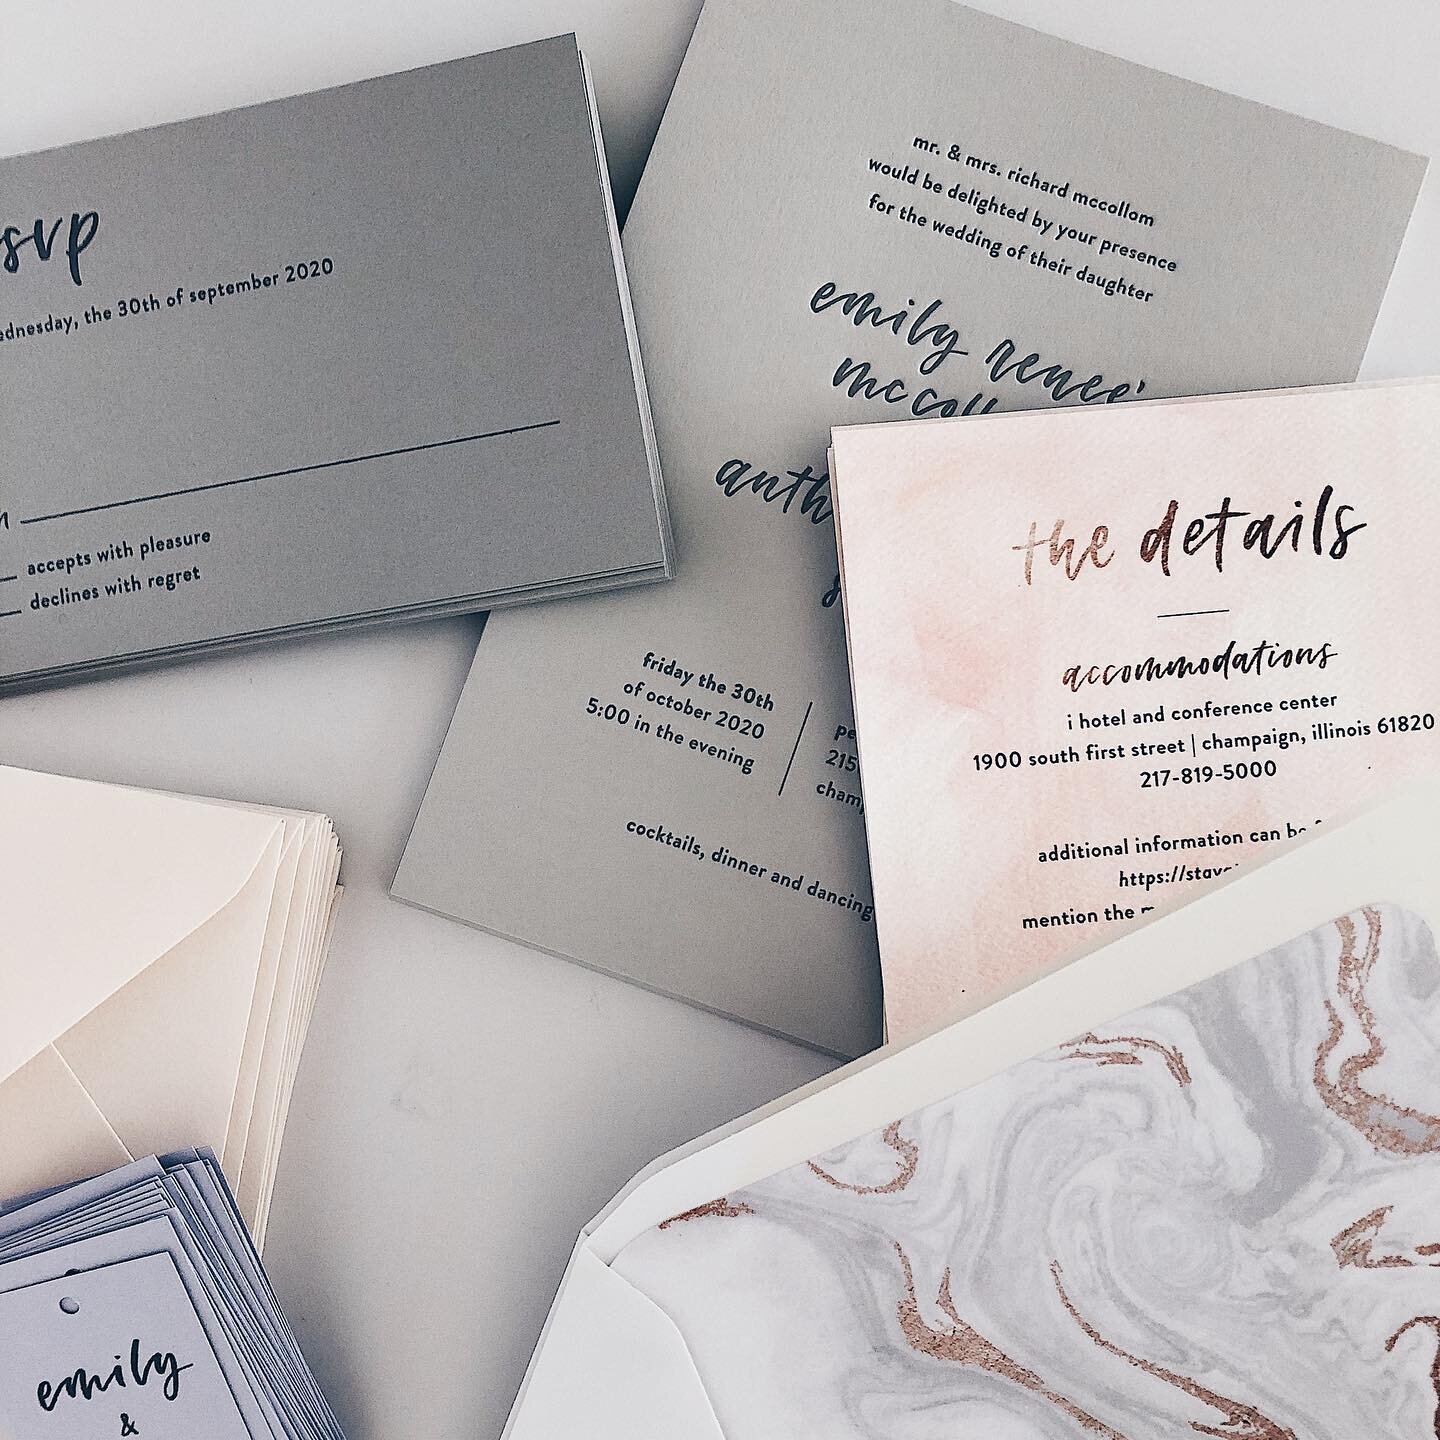 yes, all couples who work with me get custom calligraphy created for their invitations. and i do have my signature lettering styles but you can request something slightly different 😊
p.s. - zoom in on the invitation for pretty letterpress texture 😍